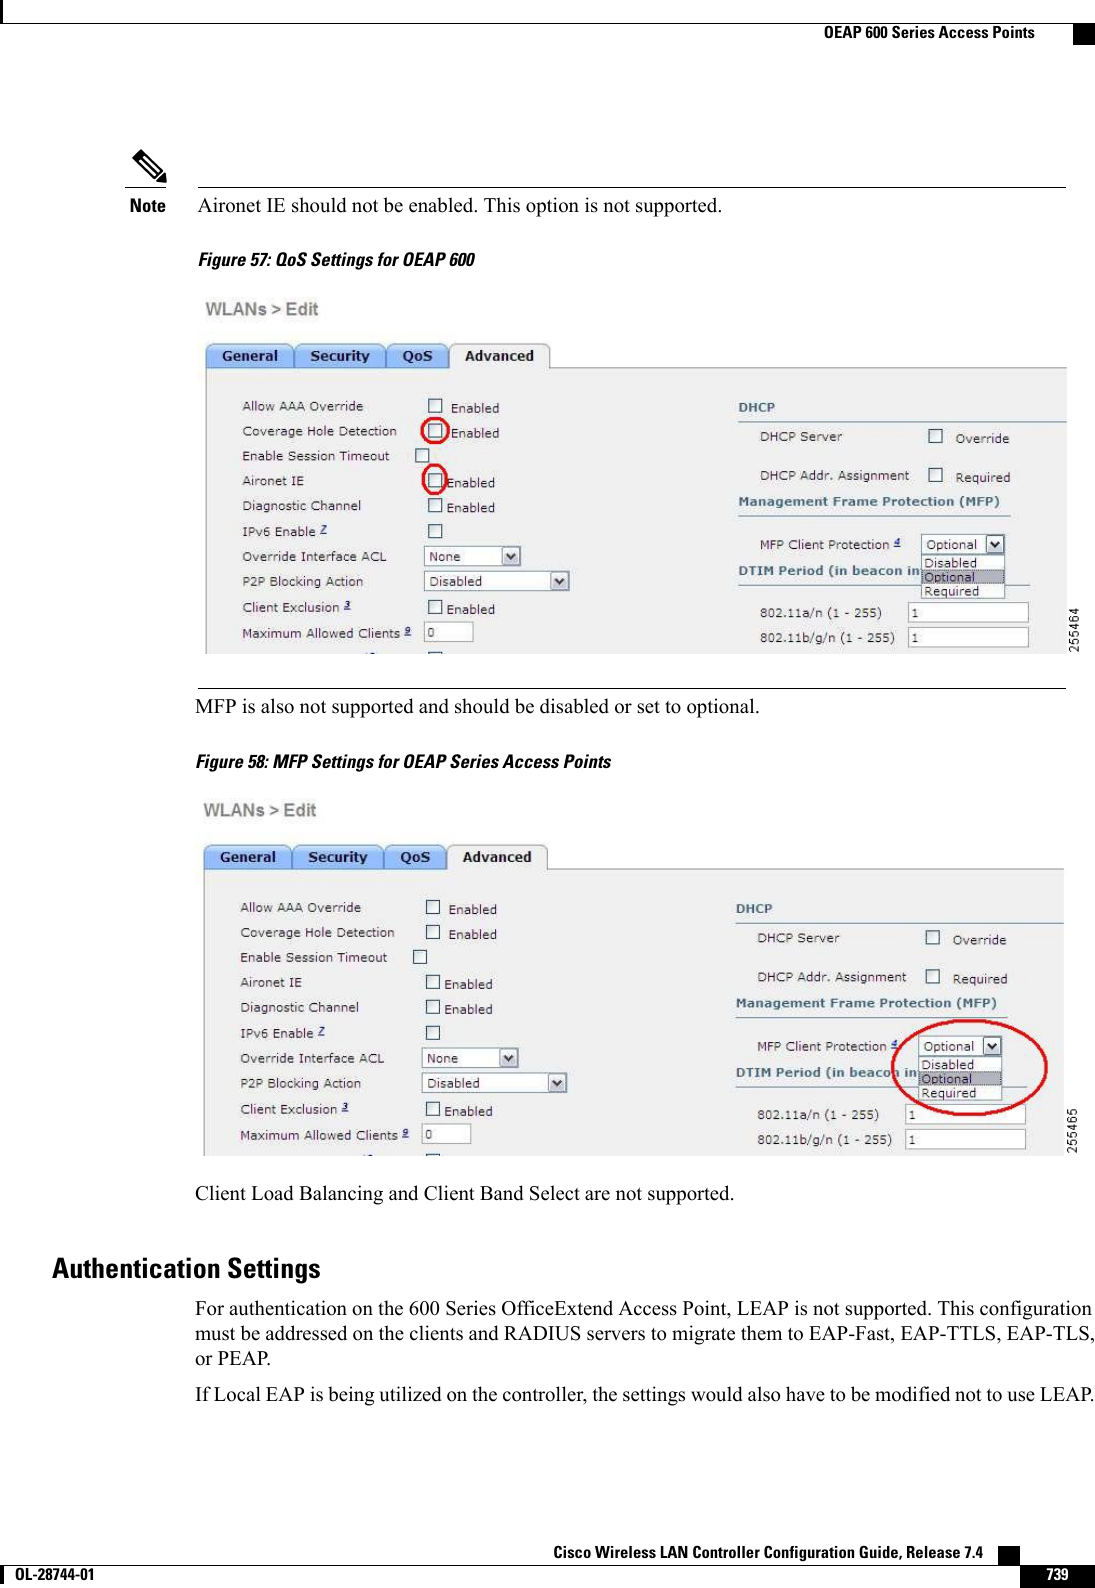 Aironet IE should not be enabled. This option is not supported.Figure 57: QoS Settings for OEAP 600NoteMFP is also not supported and should be disabled or set to optional.Figure 58: MFP Settings for OEAP Series Access PointsClient Load Balancing and Client Band Select are not supported.Authentication SettingsFor authentication on the 600 Series OfficeExtend Access Point, LEAP is not supported. This configurationmust be addressed on the clients and RADIUS servers to migrate them to EAP-Fast, EAP-TTLS, EAP-TLS,or PEAP.If Local EAP is being utilized on the controller, the settings would also have to be modified not to use LEAP.Cisco Wireless LAN Controller Configuration Guide, Release 7.4       OL-28744-01 739OEAP 600 Series Access Points